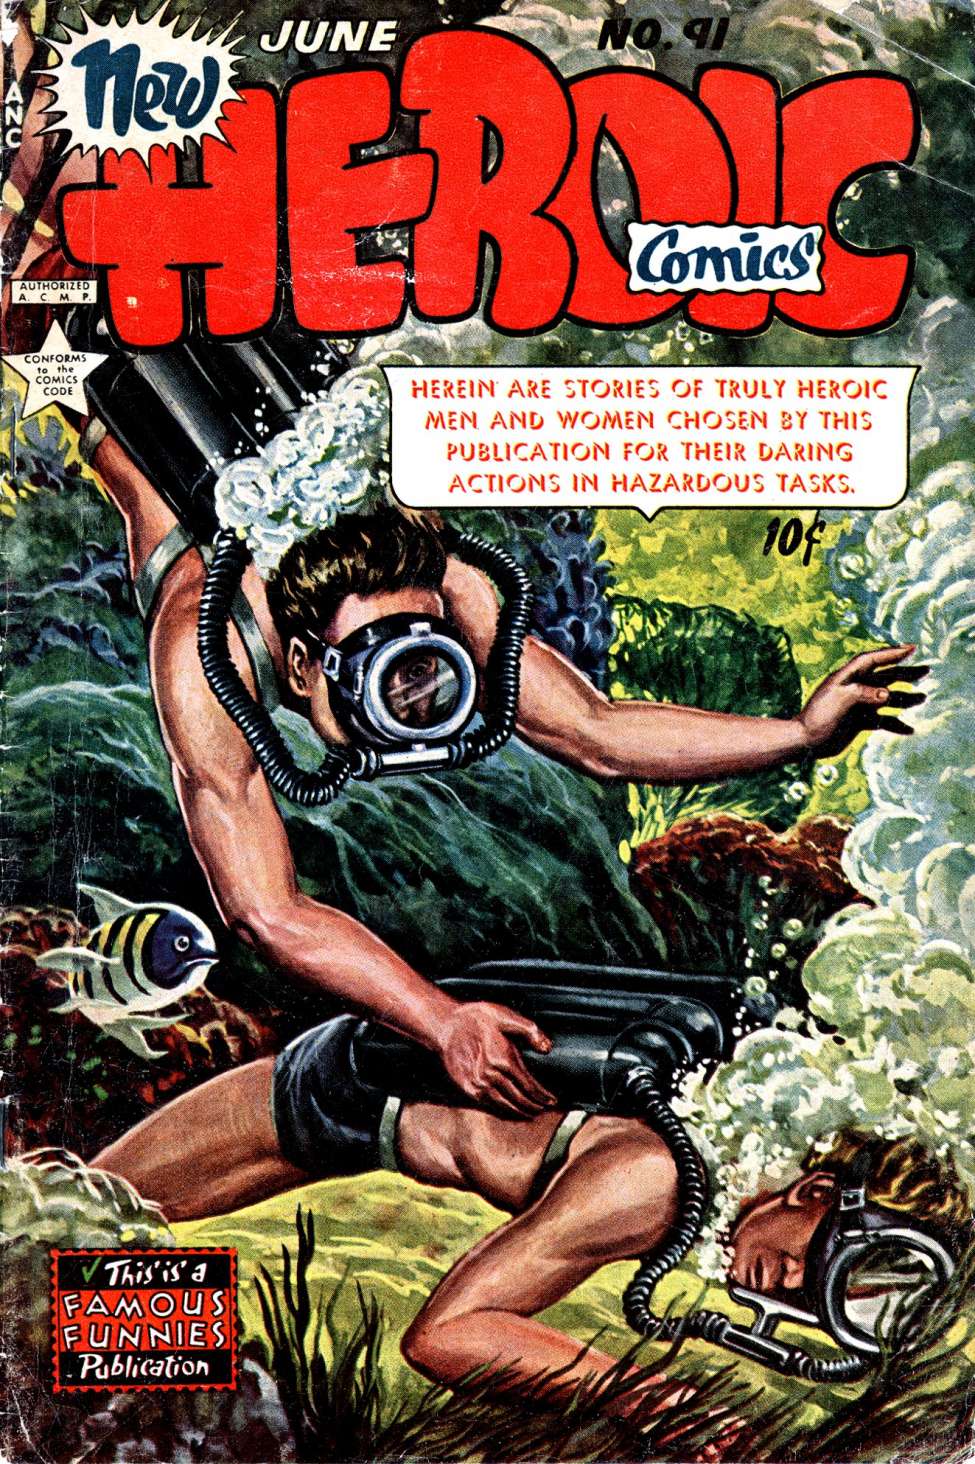 Book Cover For New Heroic Comics 91 (alt) - Version 2